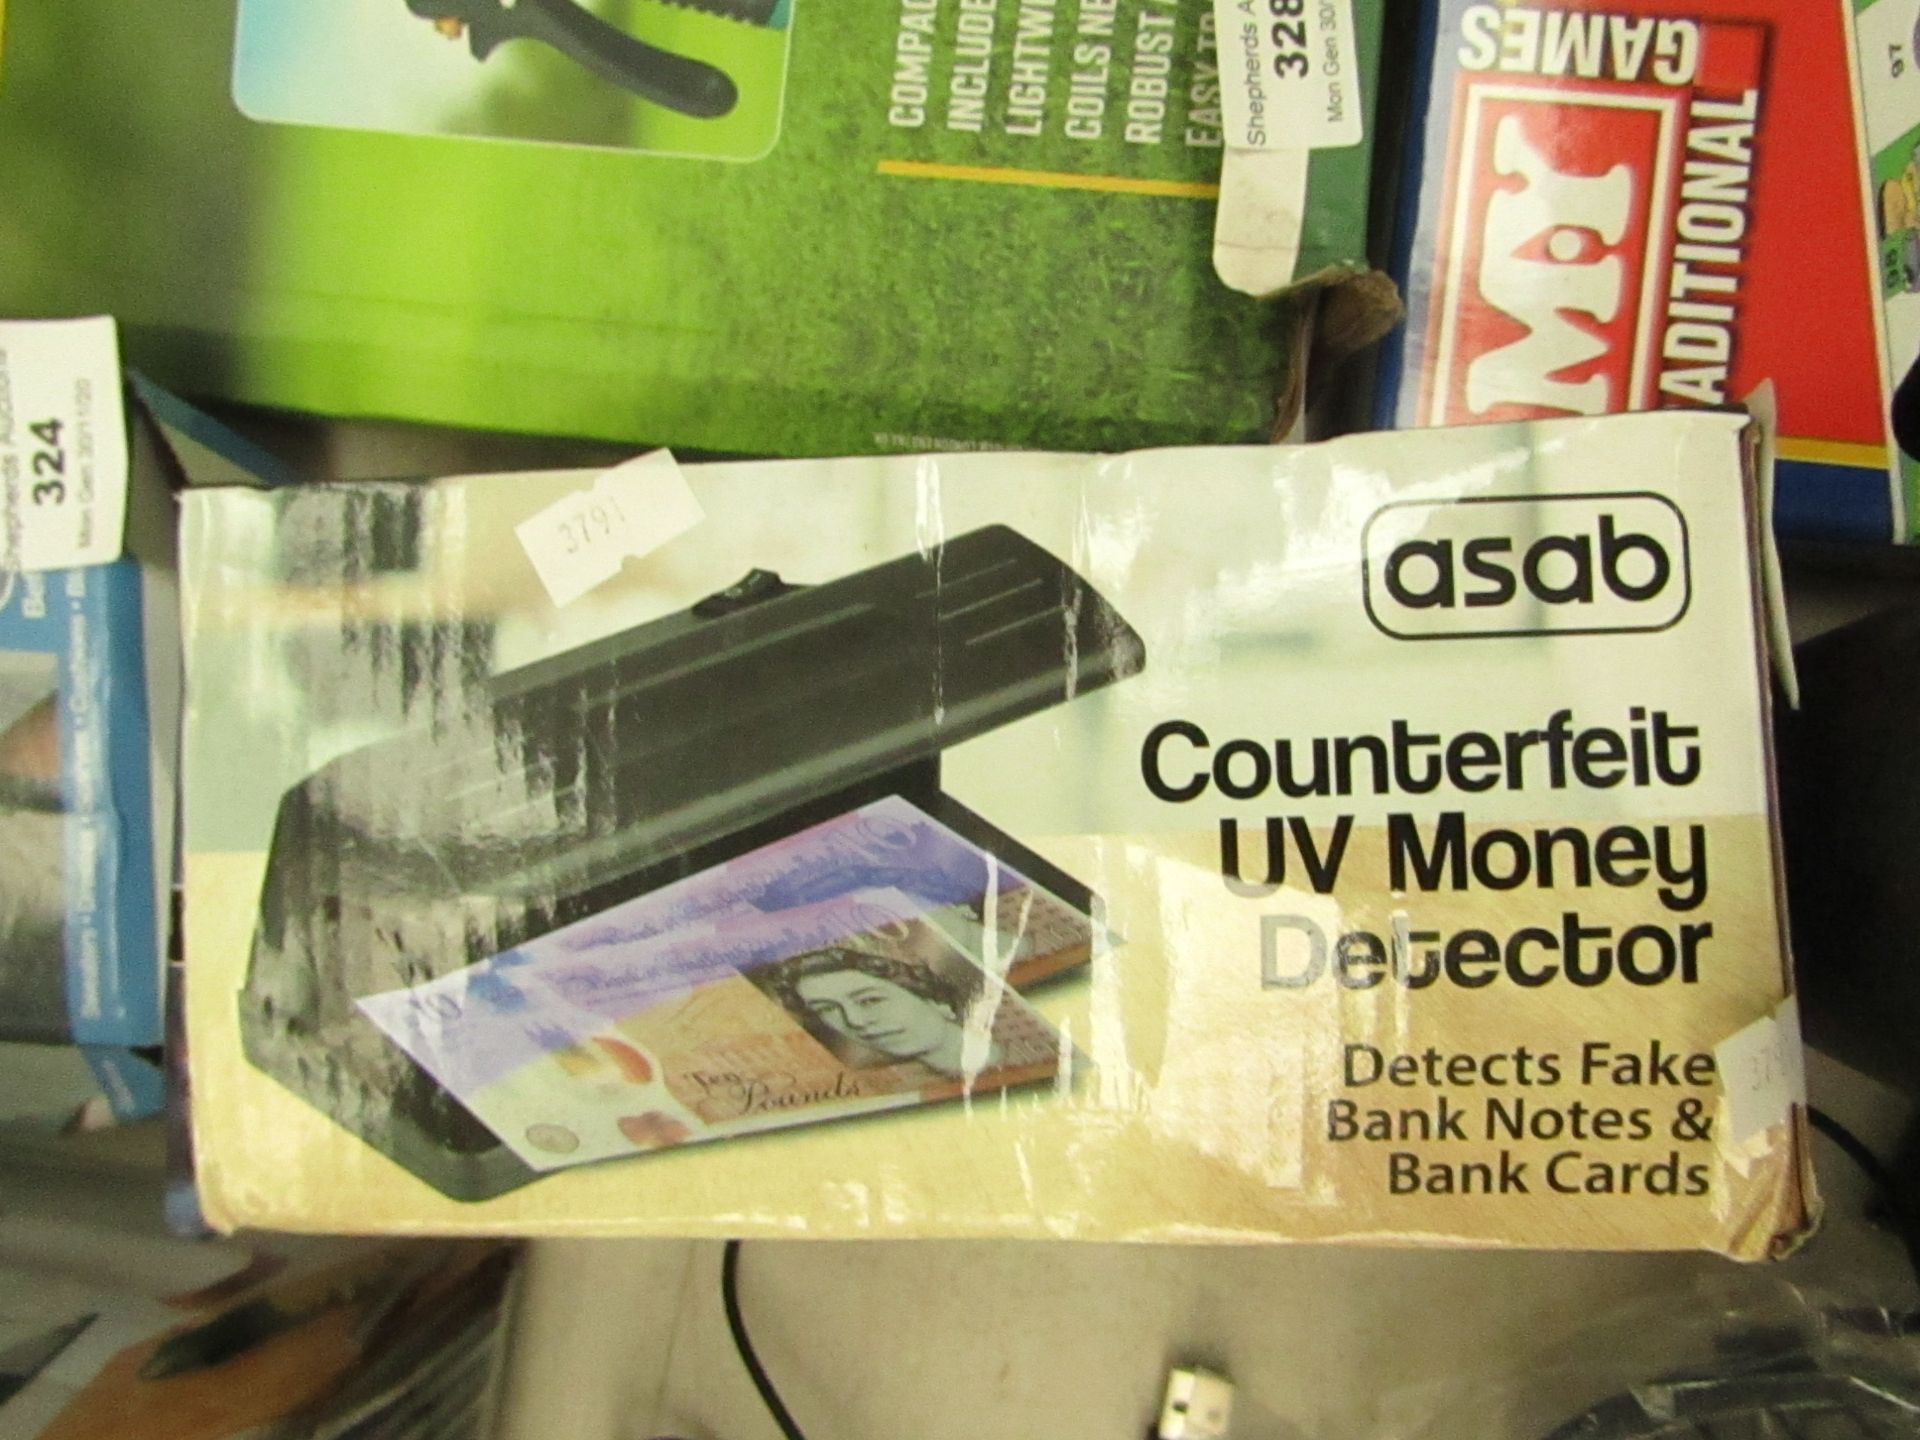 Asab - Counterfeit UV Money Detector - Unchecked & Boxed.